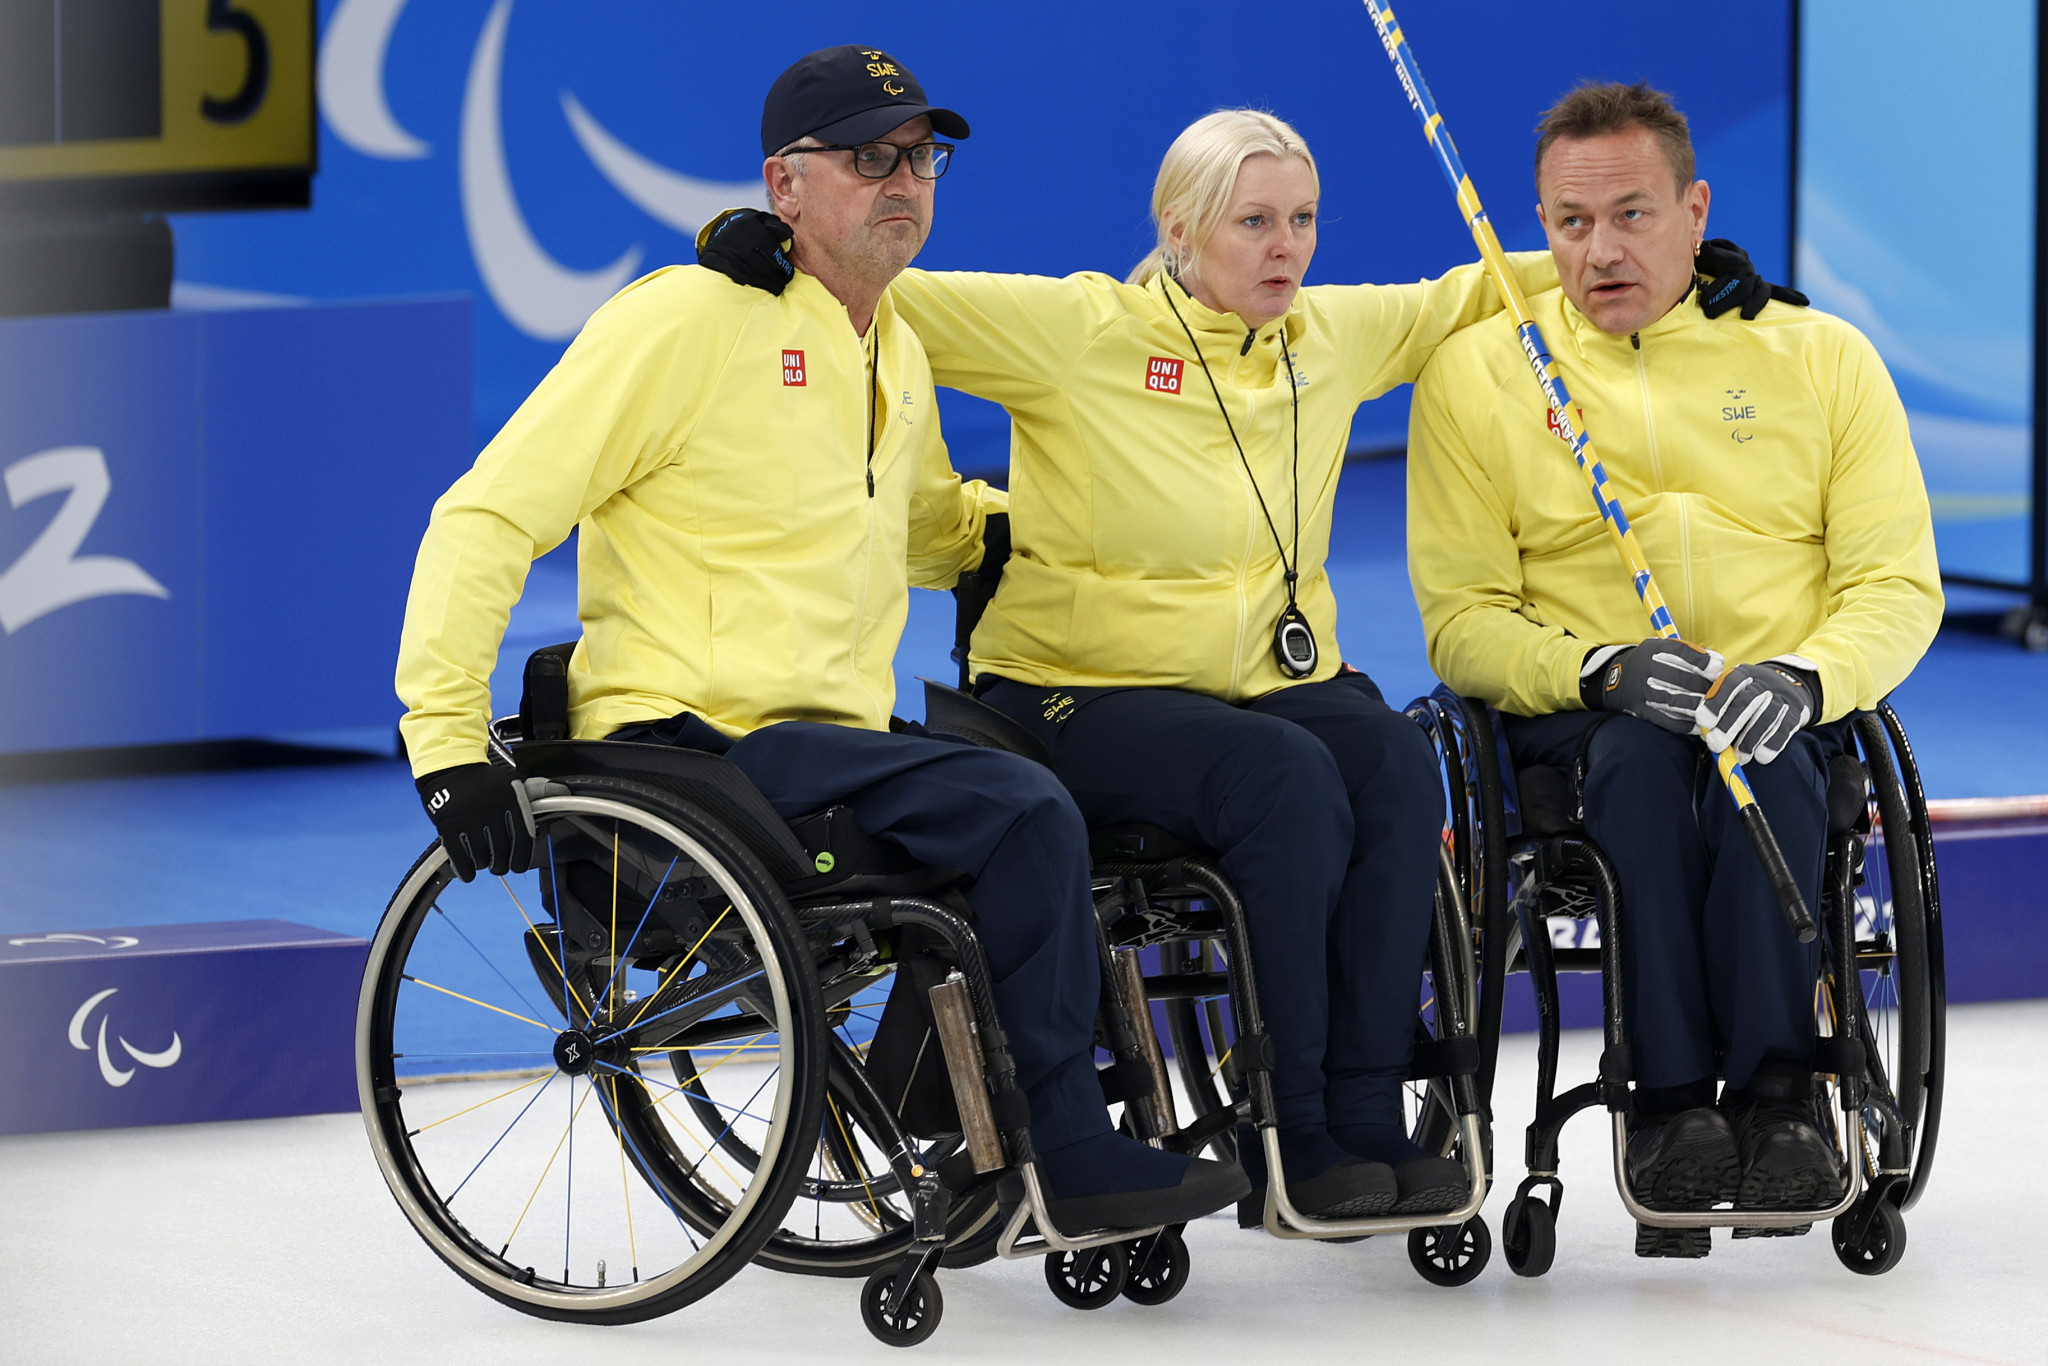 Sweden has a strong record of 6-2 after day five in the wheelchair curling - the same as China ©Getty Images